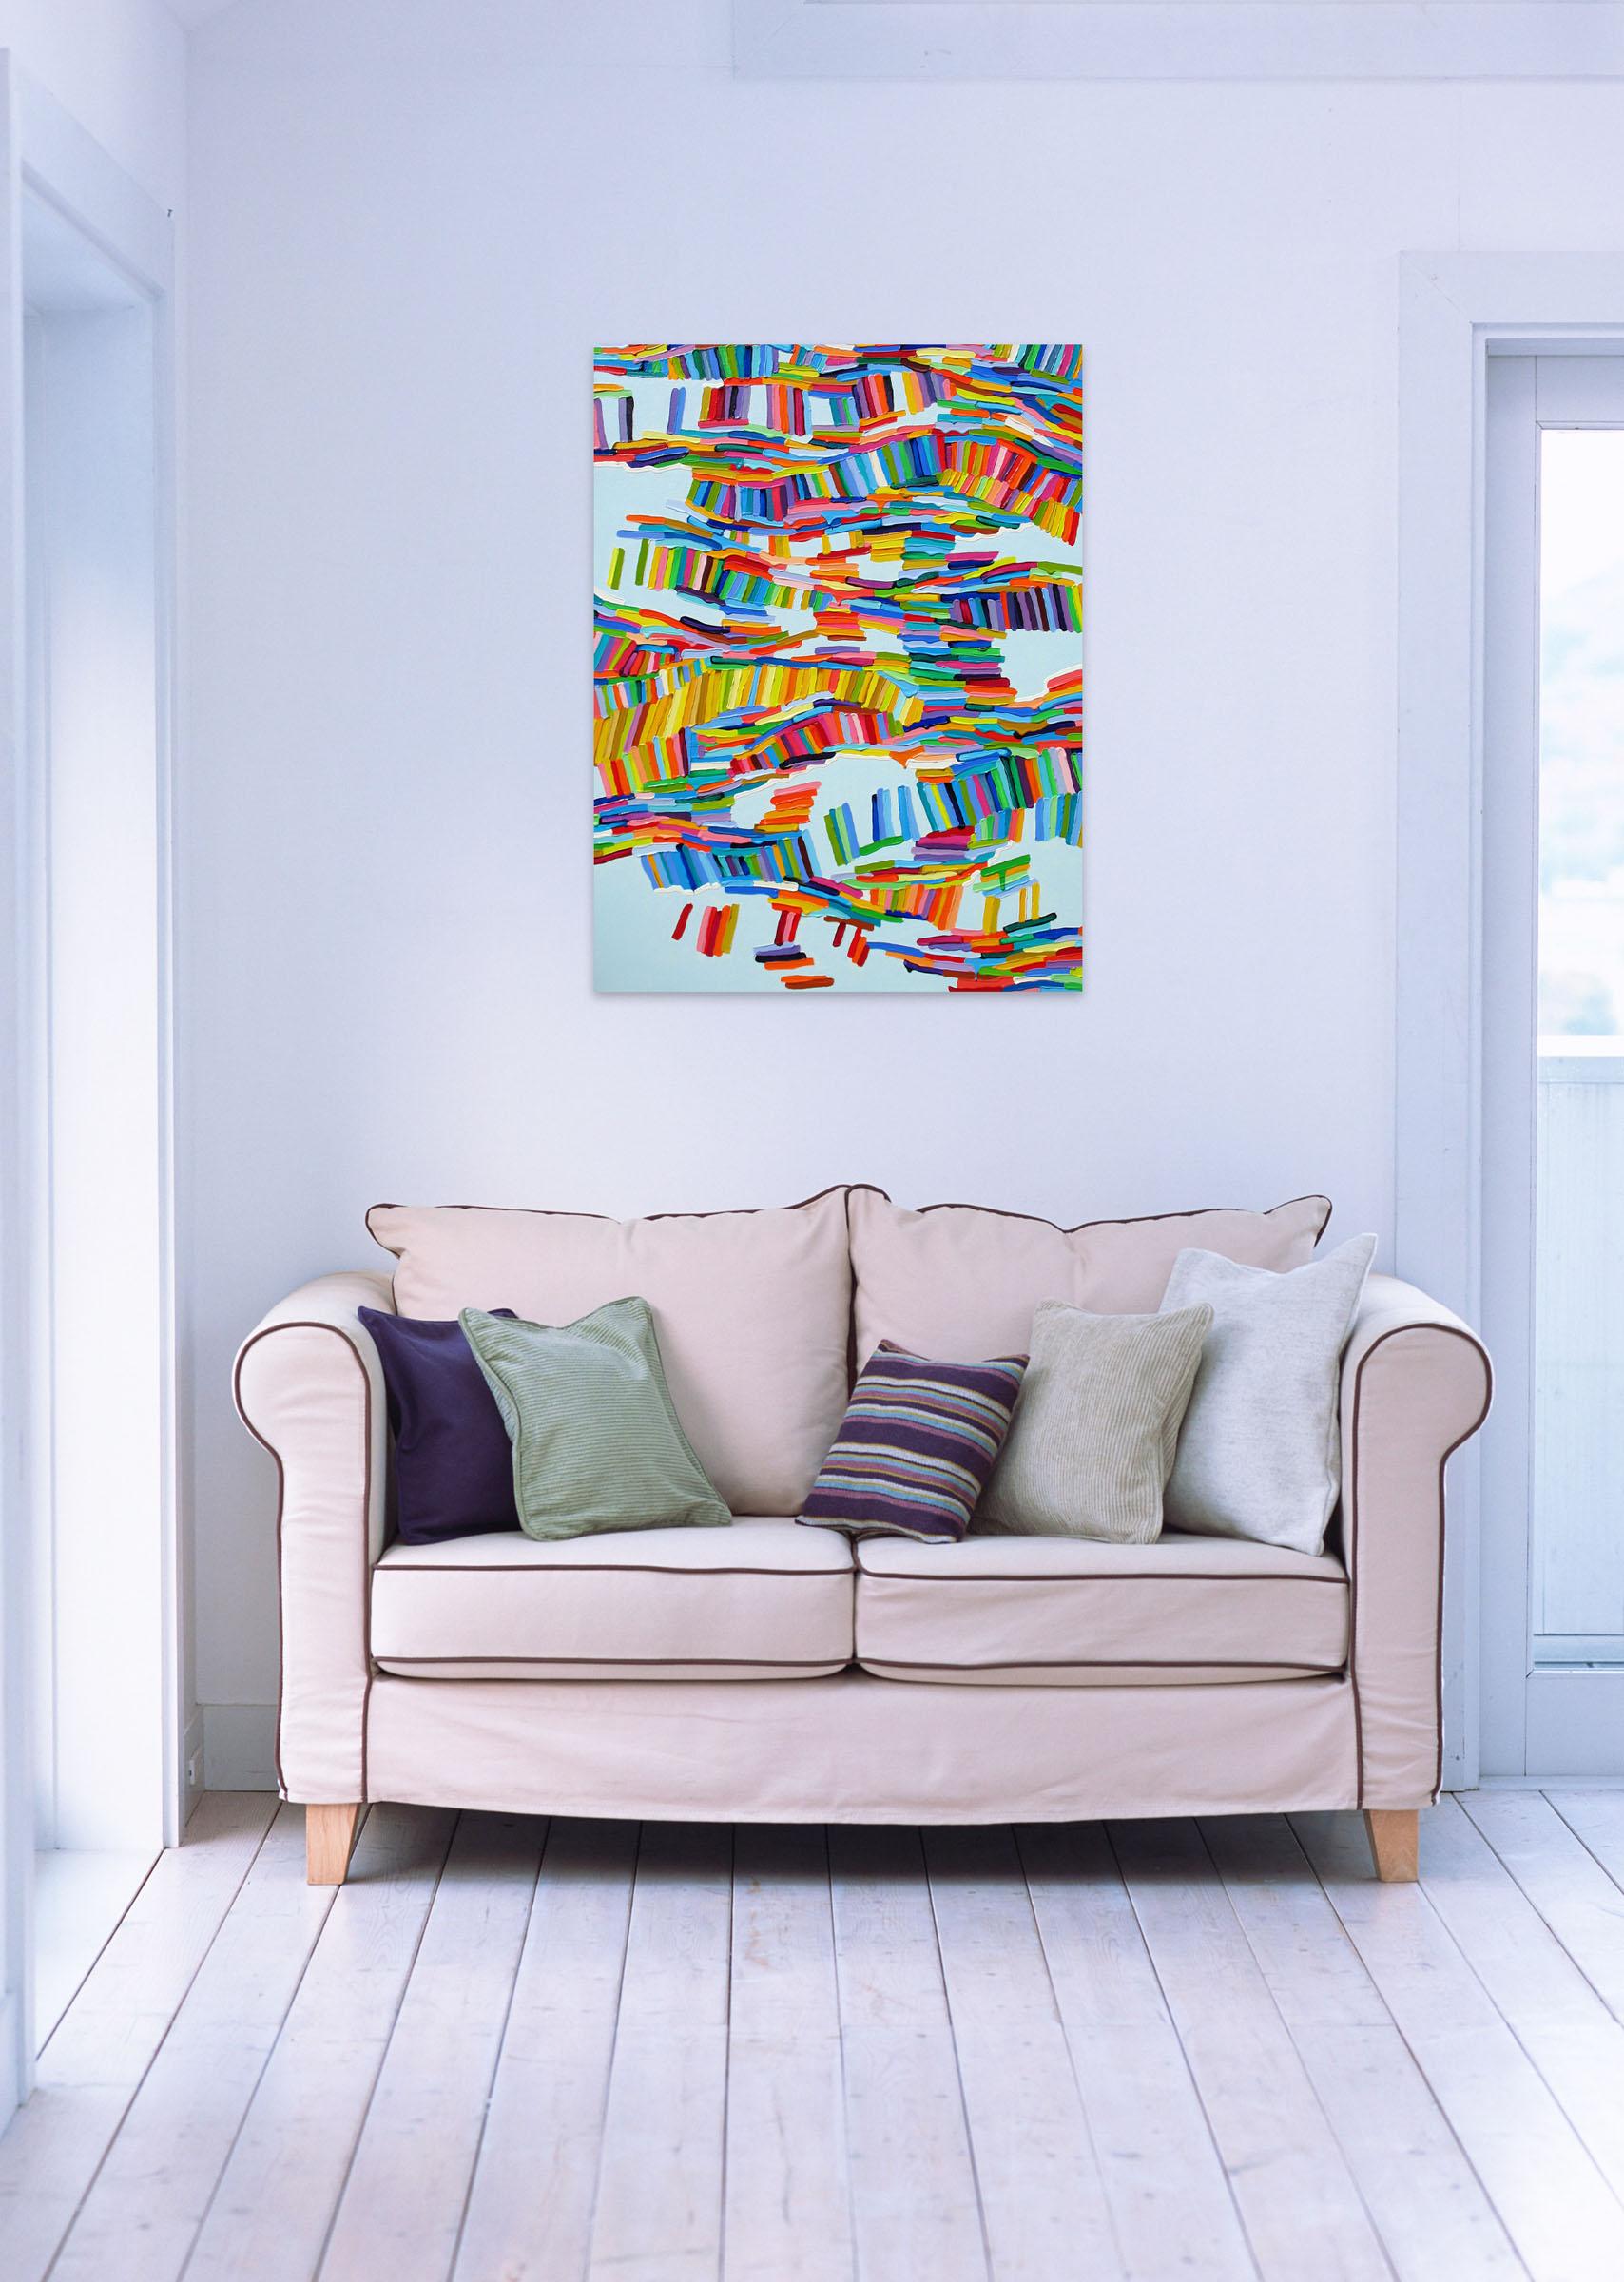 Wishful thinking (Abstract painting) - Painting by Martina Nehrling